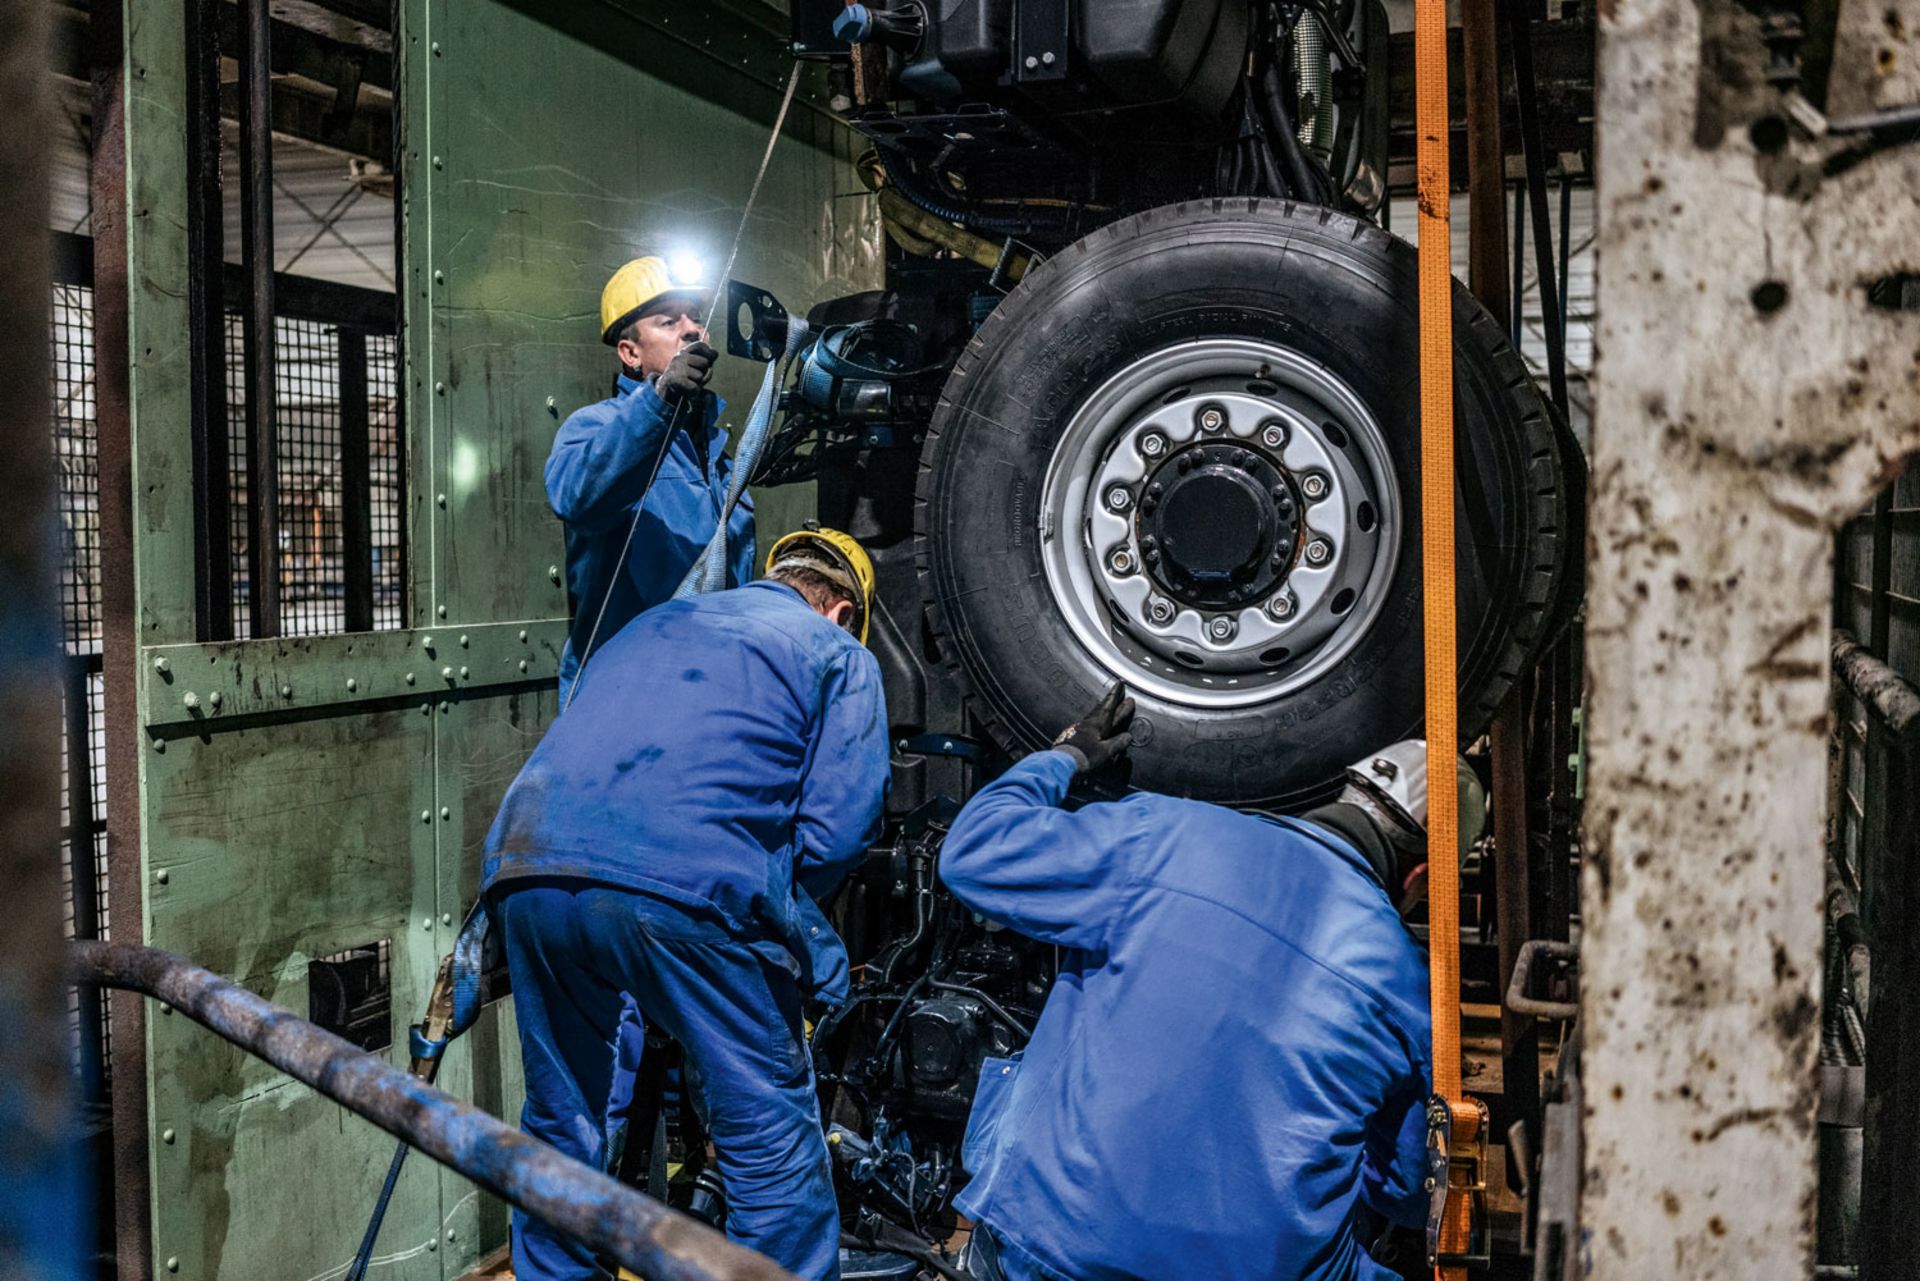 Precision work – The truck parts are carefully removed from the cage.